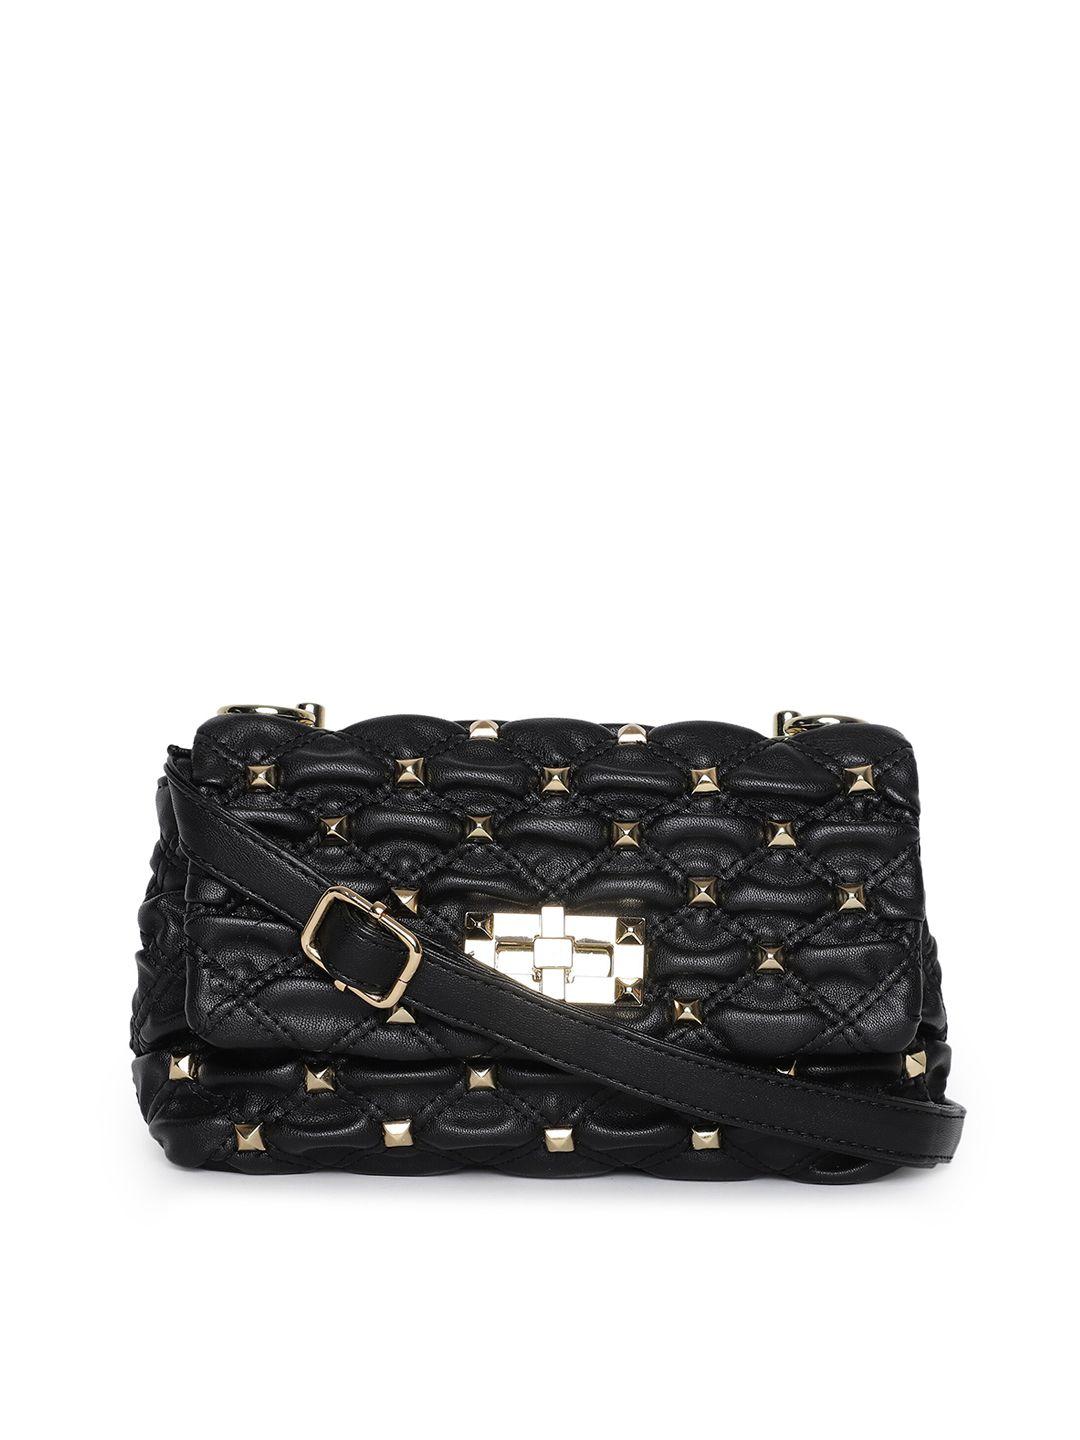 beverly hills polo club embellished pu structured sling bag with quilted